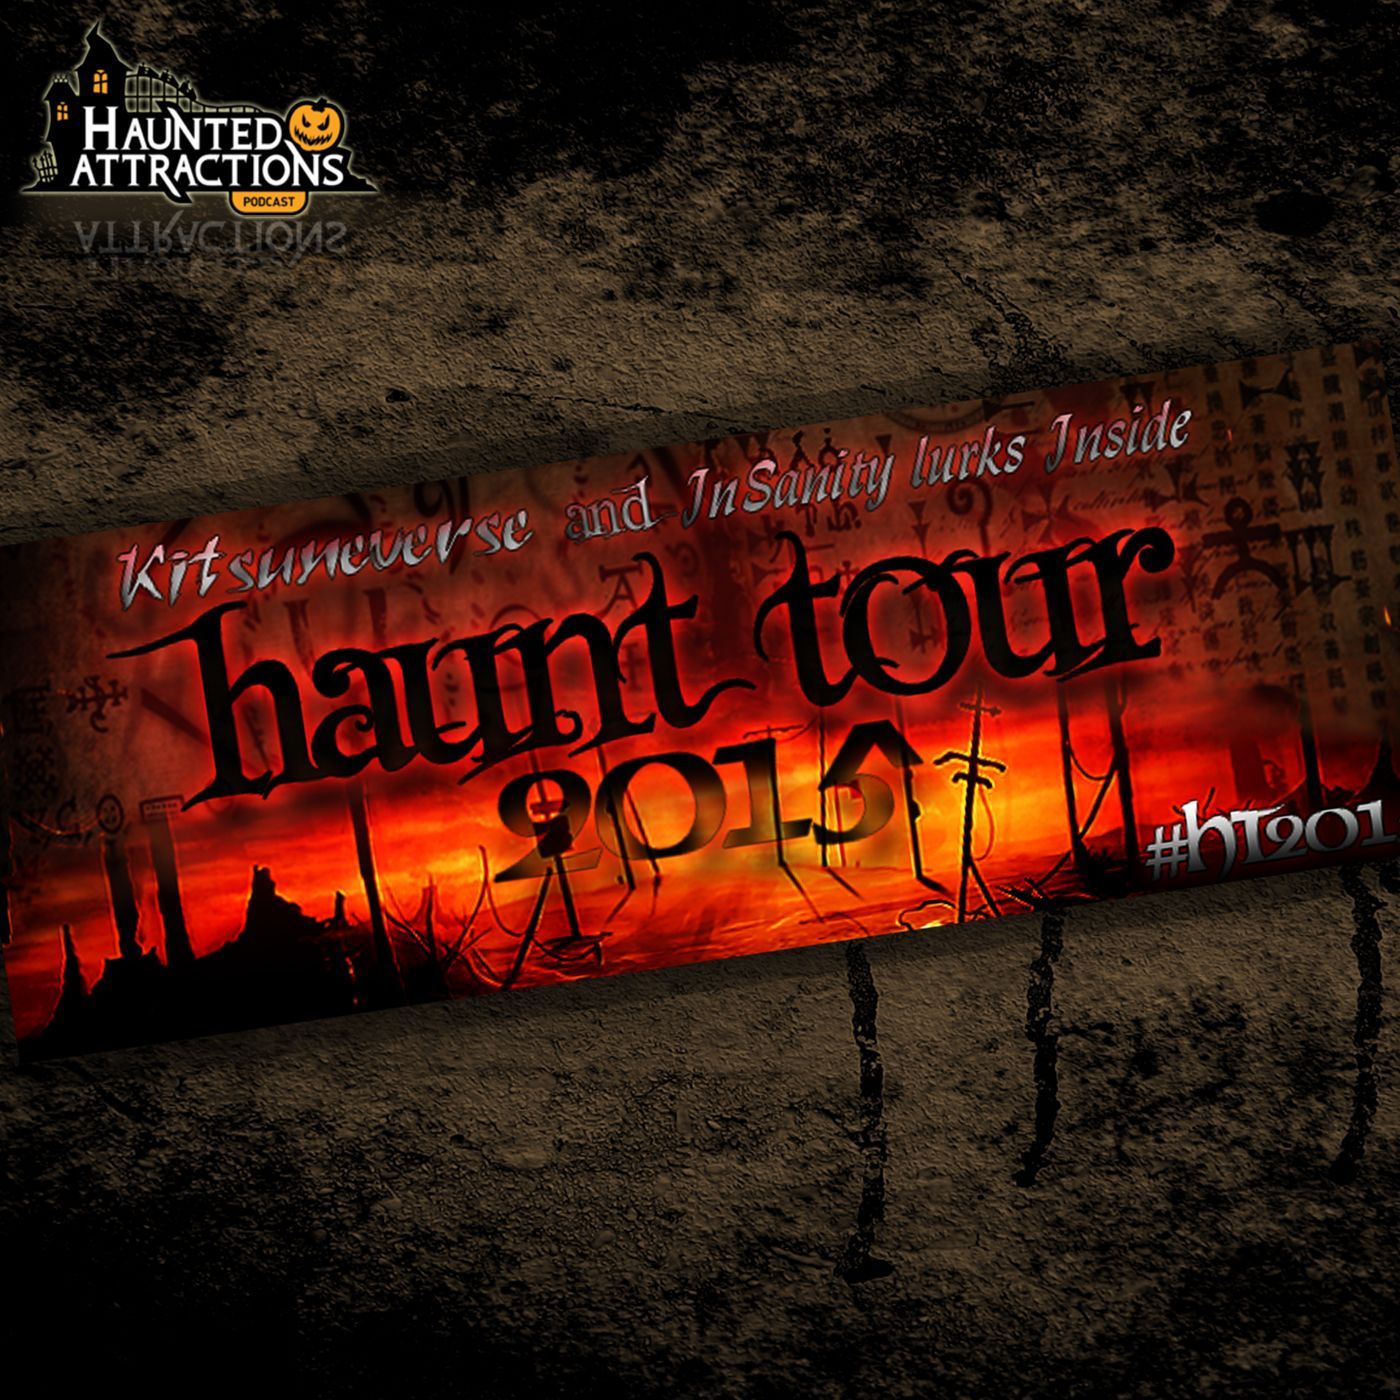 Haunt Tour: Terror Behind The Walls At Eastern State Penitentiary in Philadelphia Pennsylvania